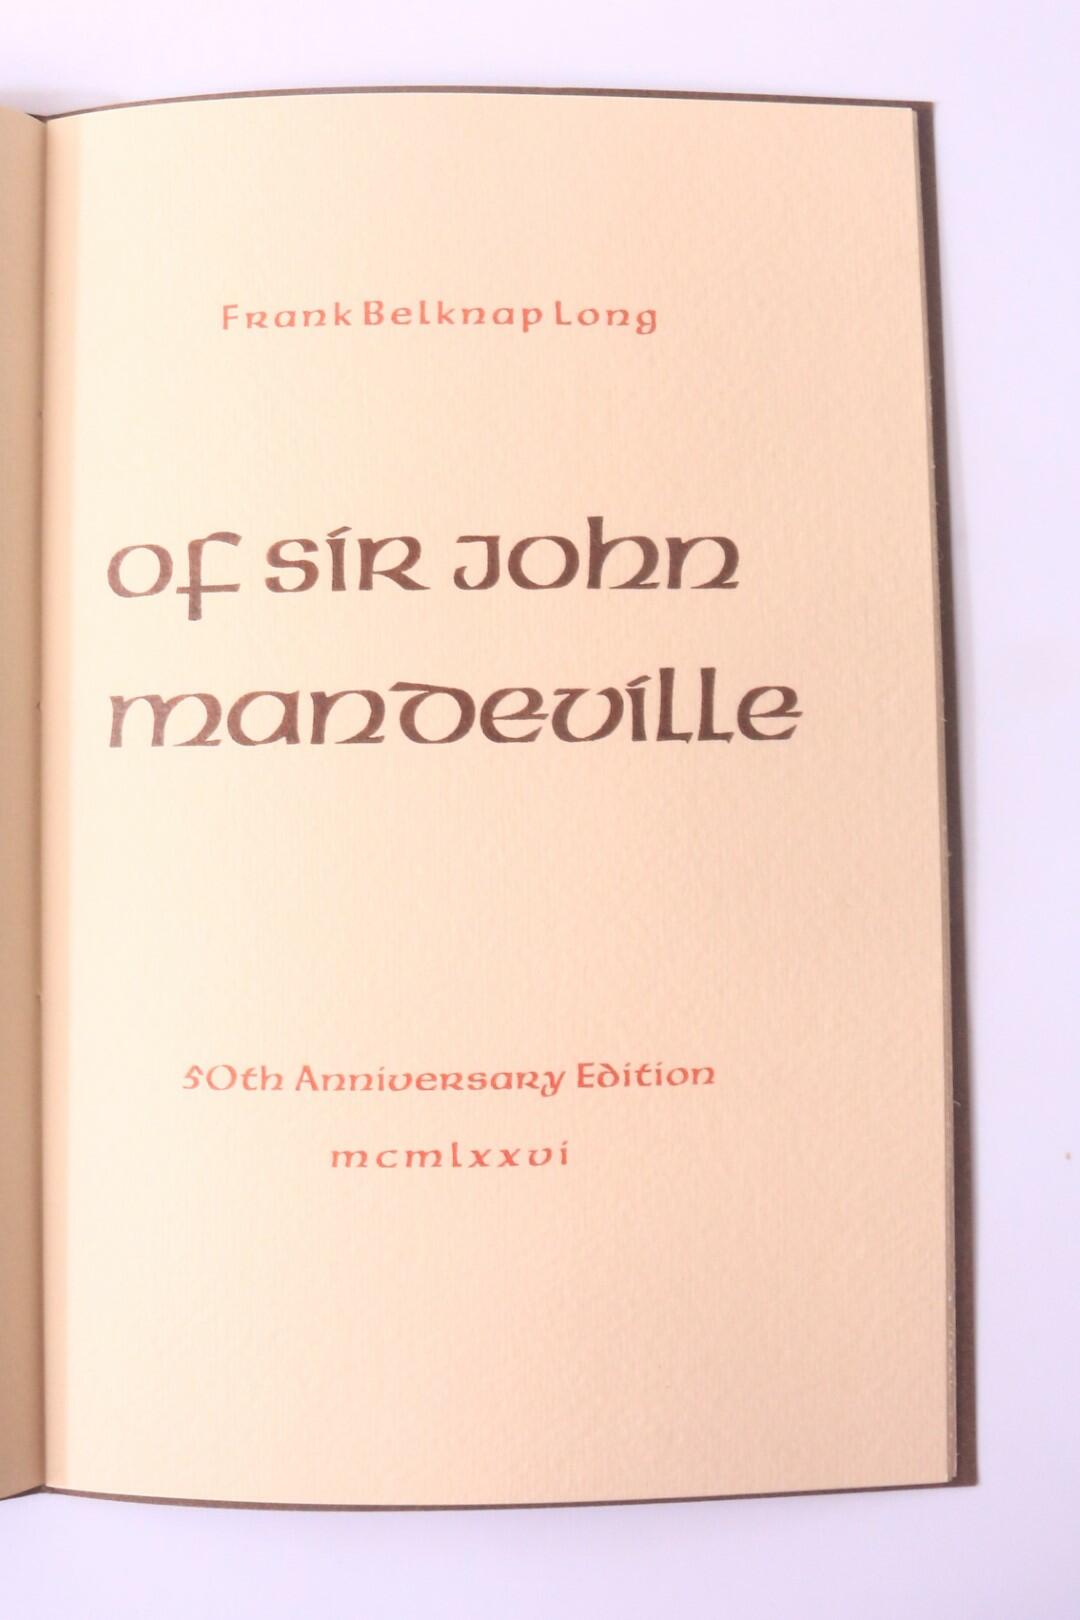 Frank Belknap Long - The Marriage of Sir John de Mandeville - Roy A Squires, 1976, Signed Limited Edition.